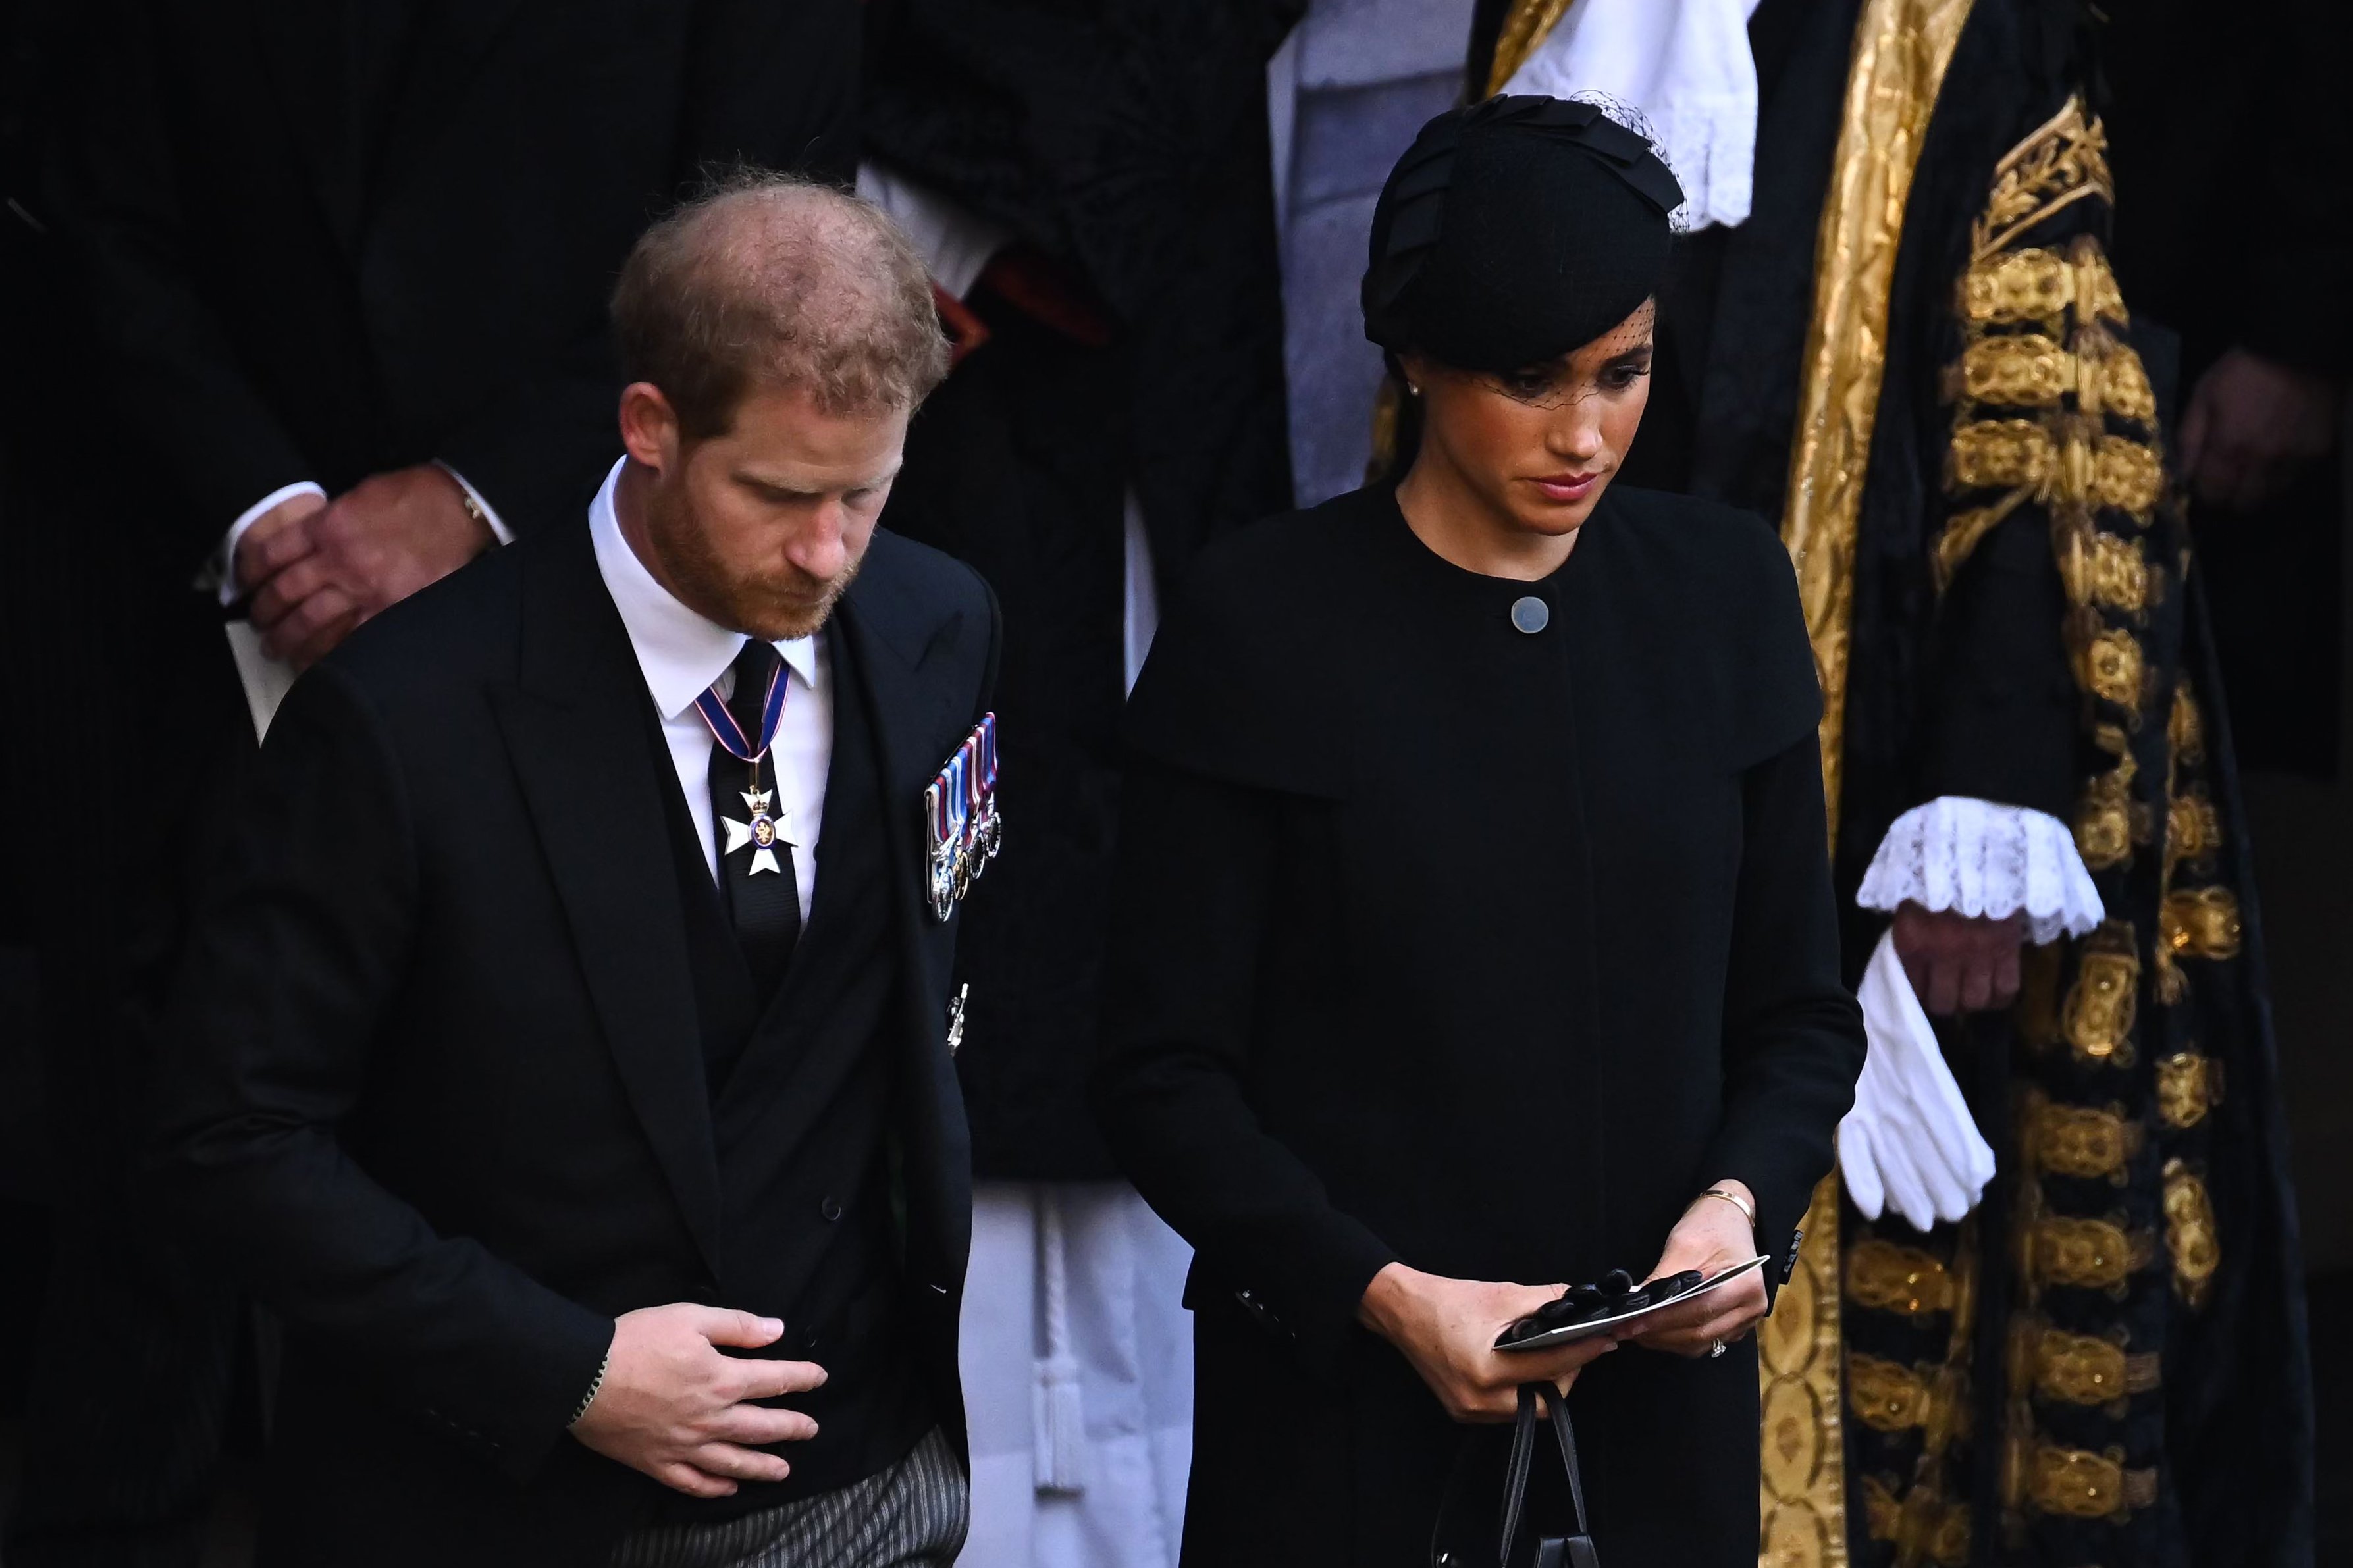 Prince Harry, Duke of Sussex and Meghan, Duchess of Sussex leave after a service for Queen Elizabeth II's coffin reception at Westminster Hall on September 14, 2022 in London, UK |  Source: Getty Images 